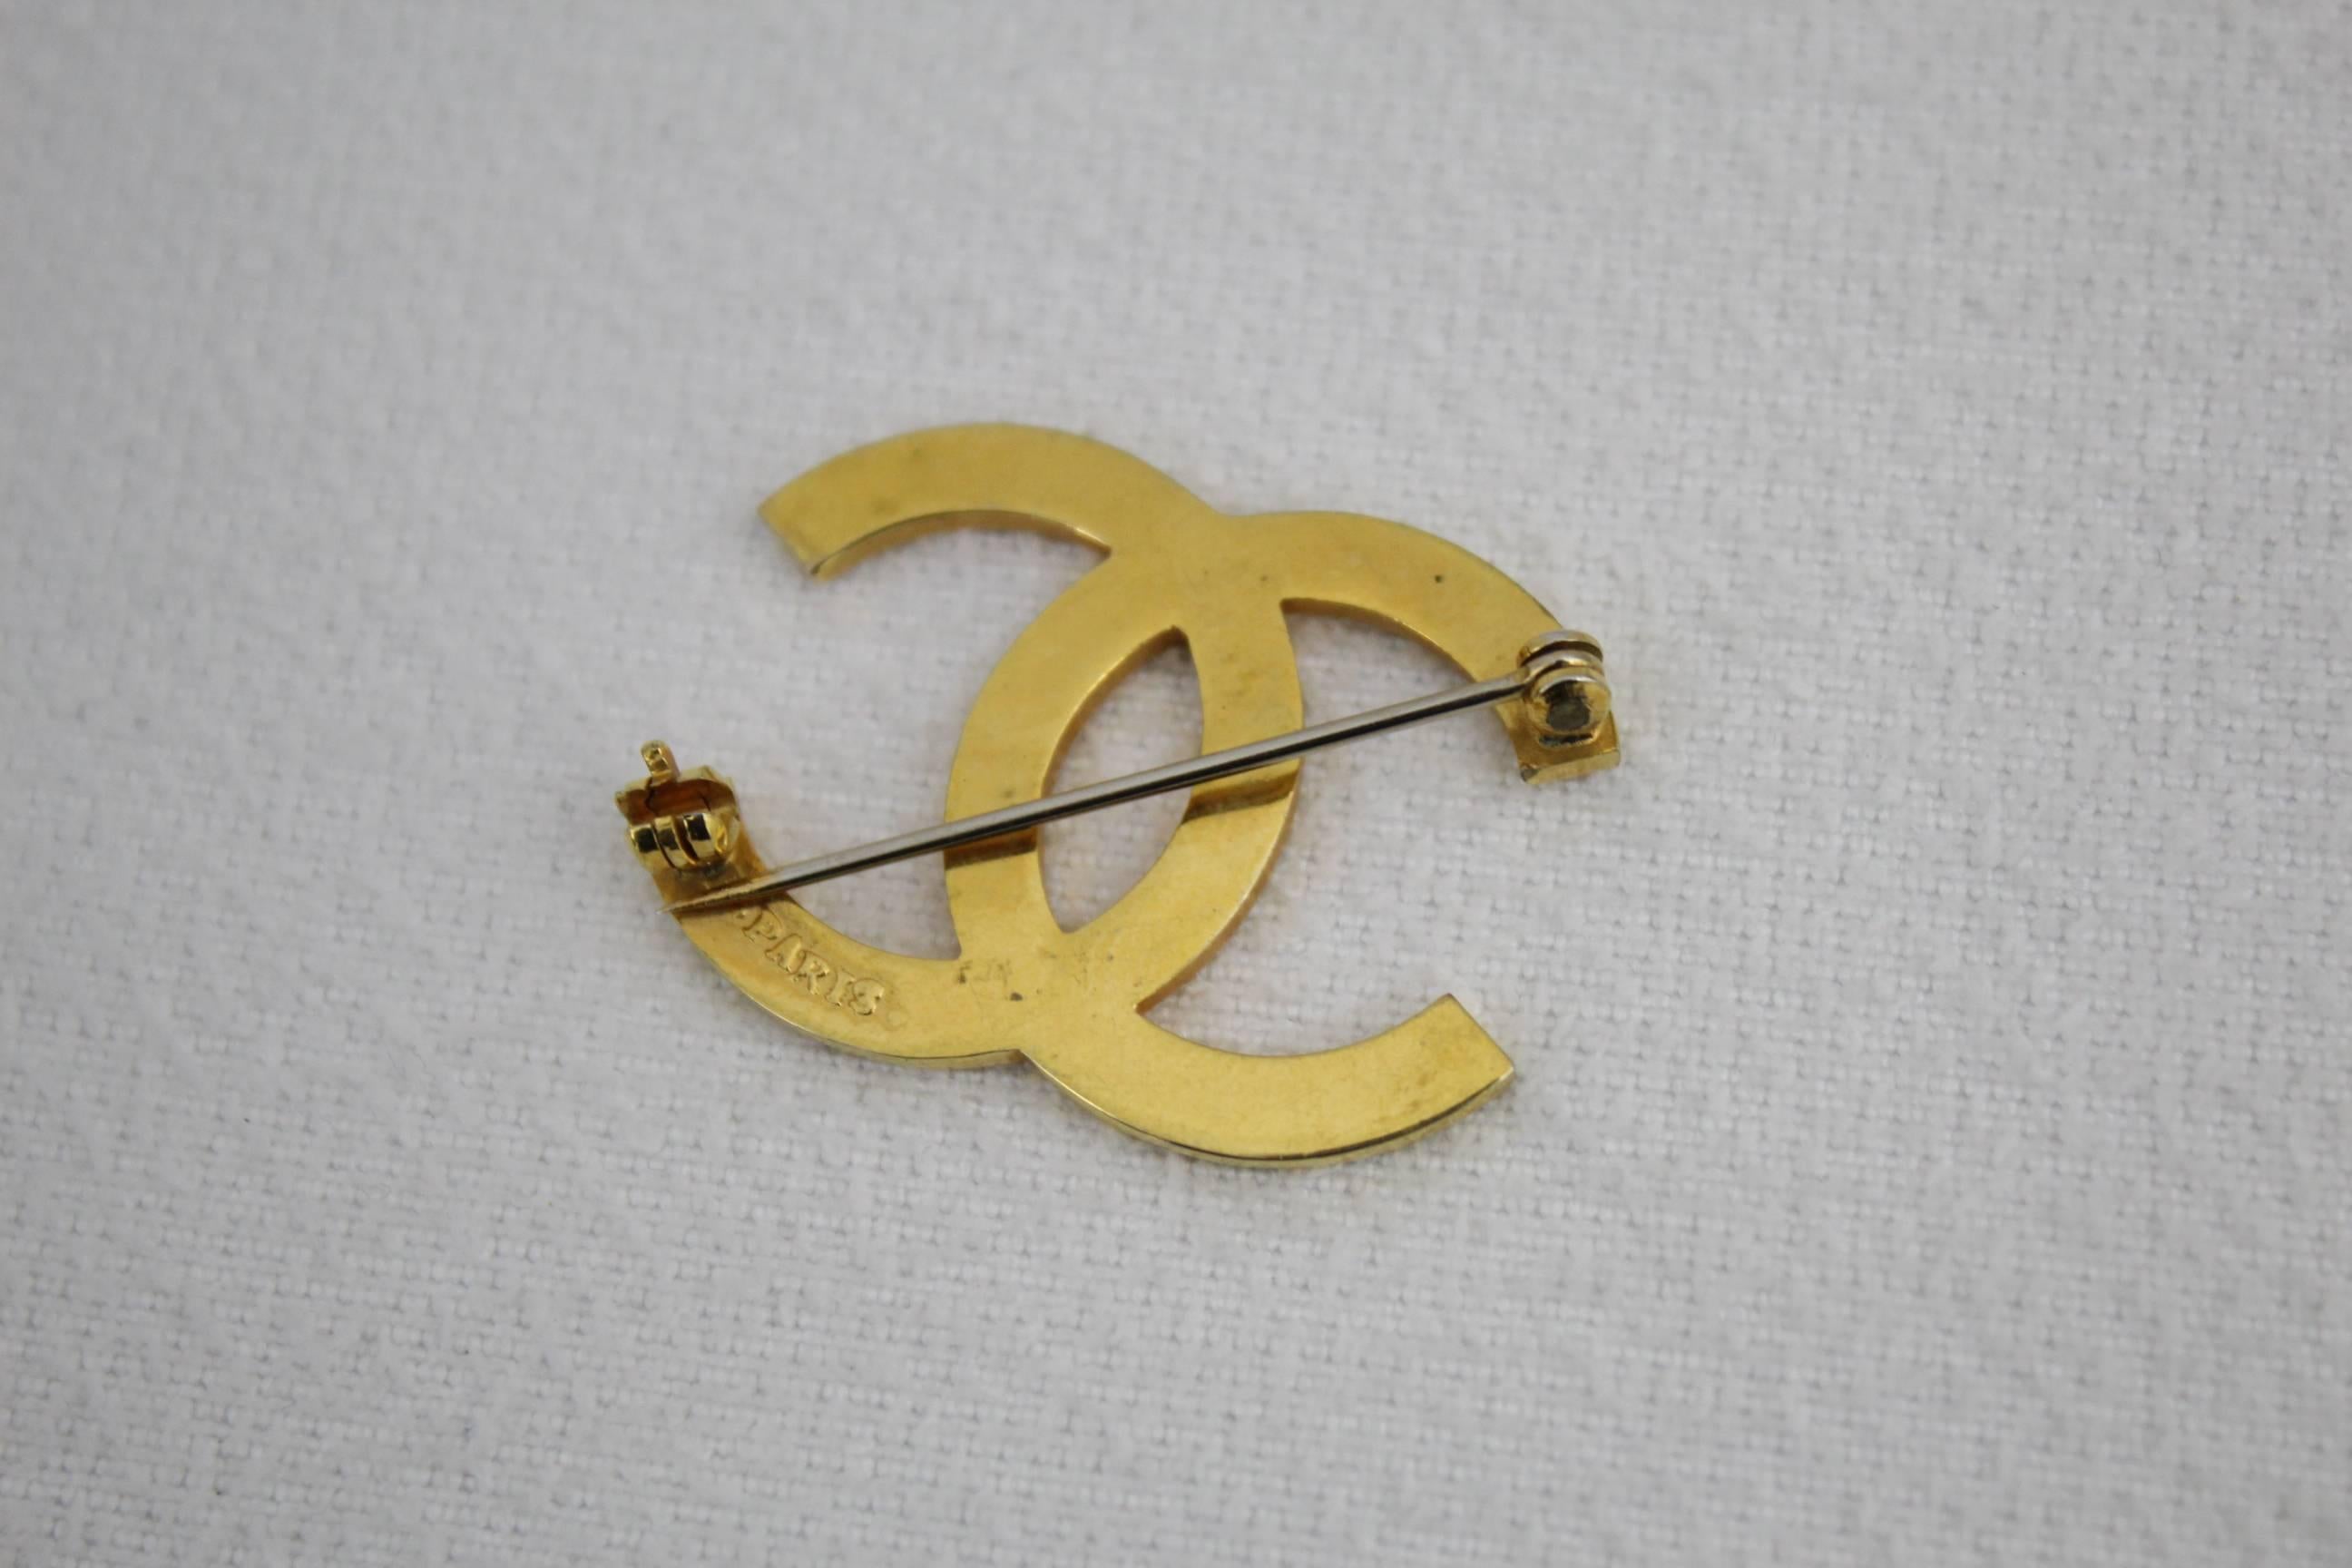 Lovely Vintage Chanel gold plated Brooche representing the logo of the house.

Size 1,5 inches

Signed in the back